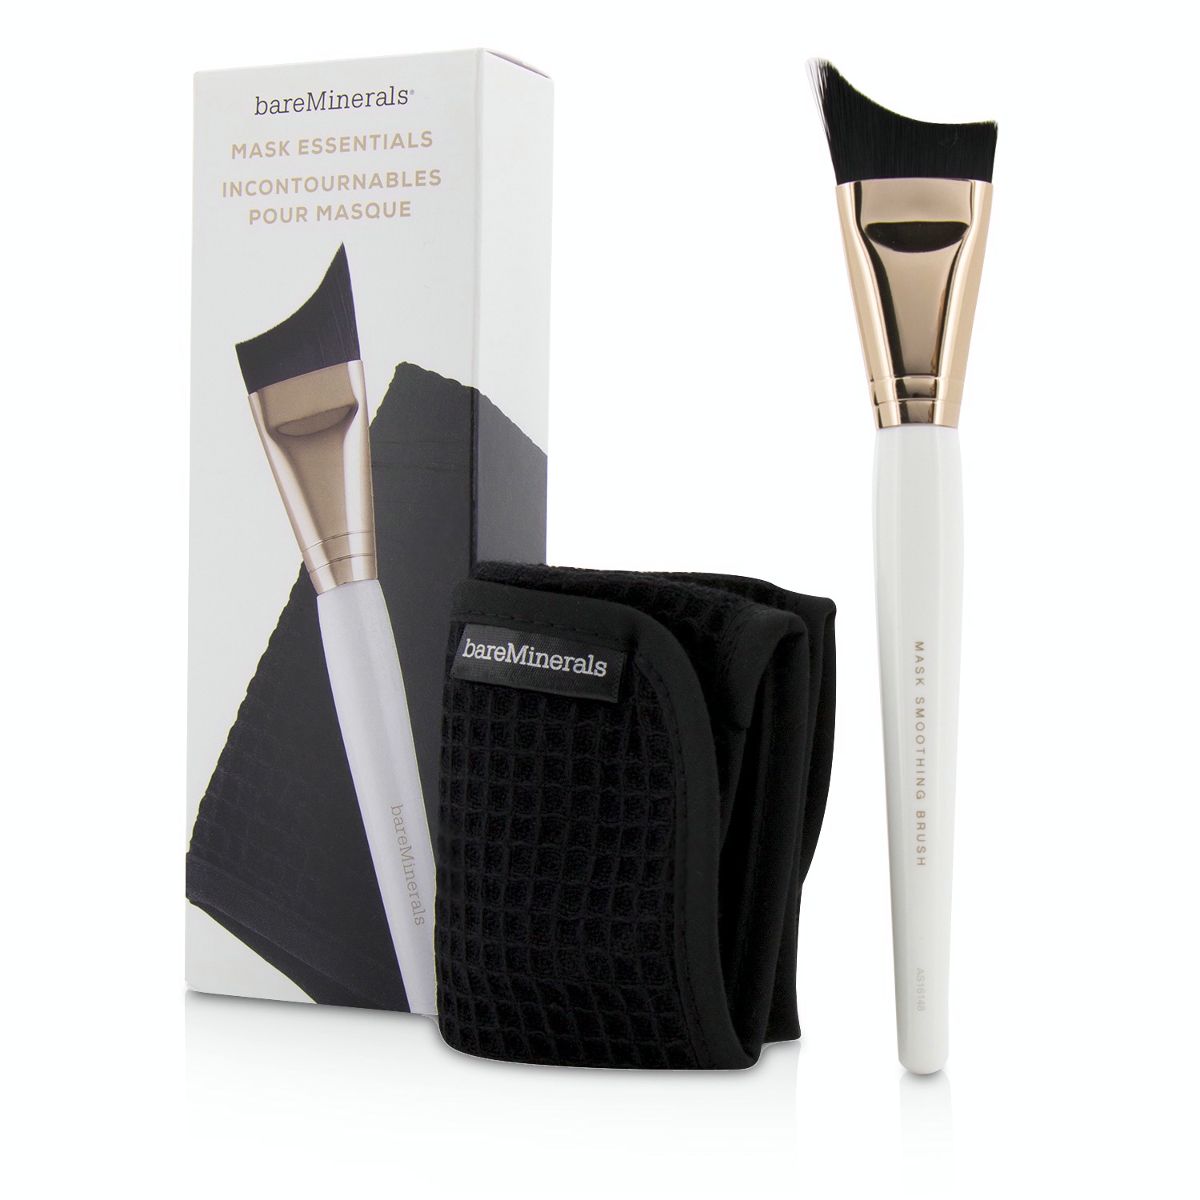 Mask Essentials - Smoothing Brush And Removal Cloth BareMinerals Image